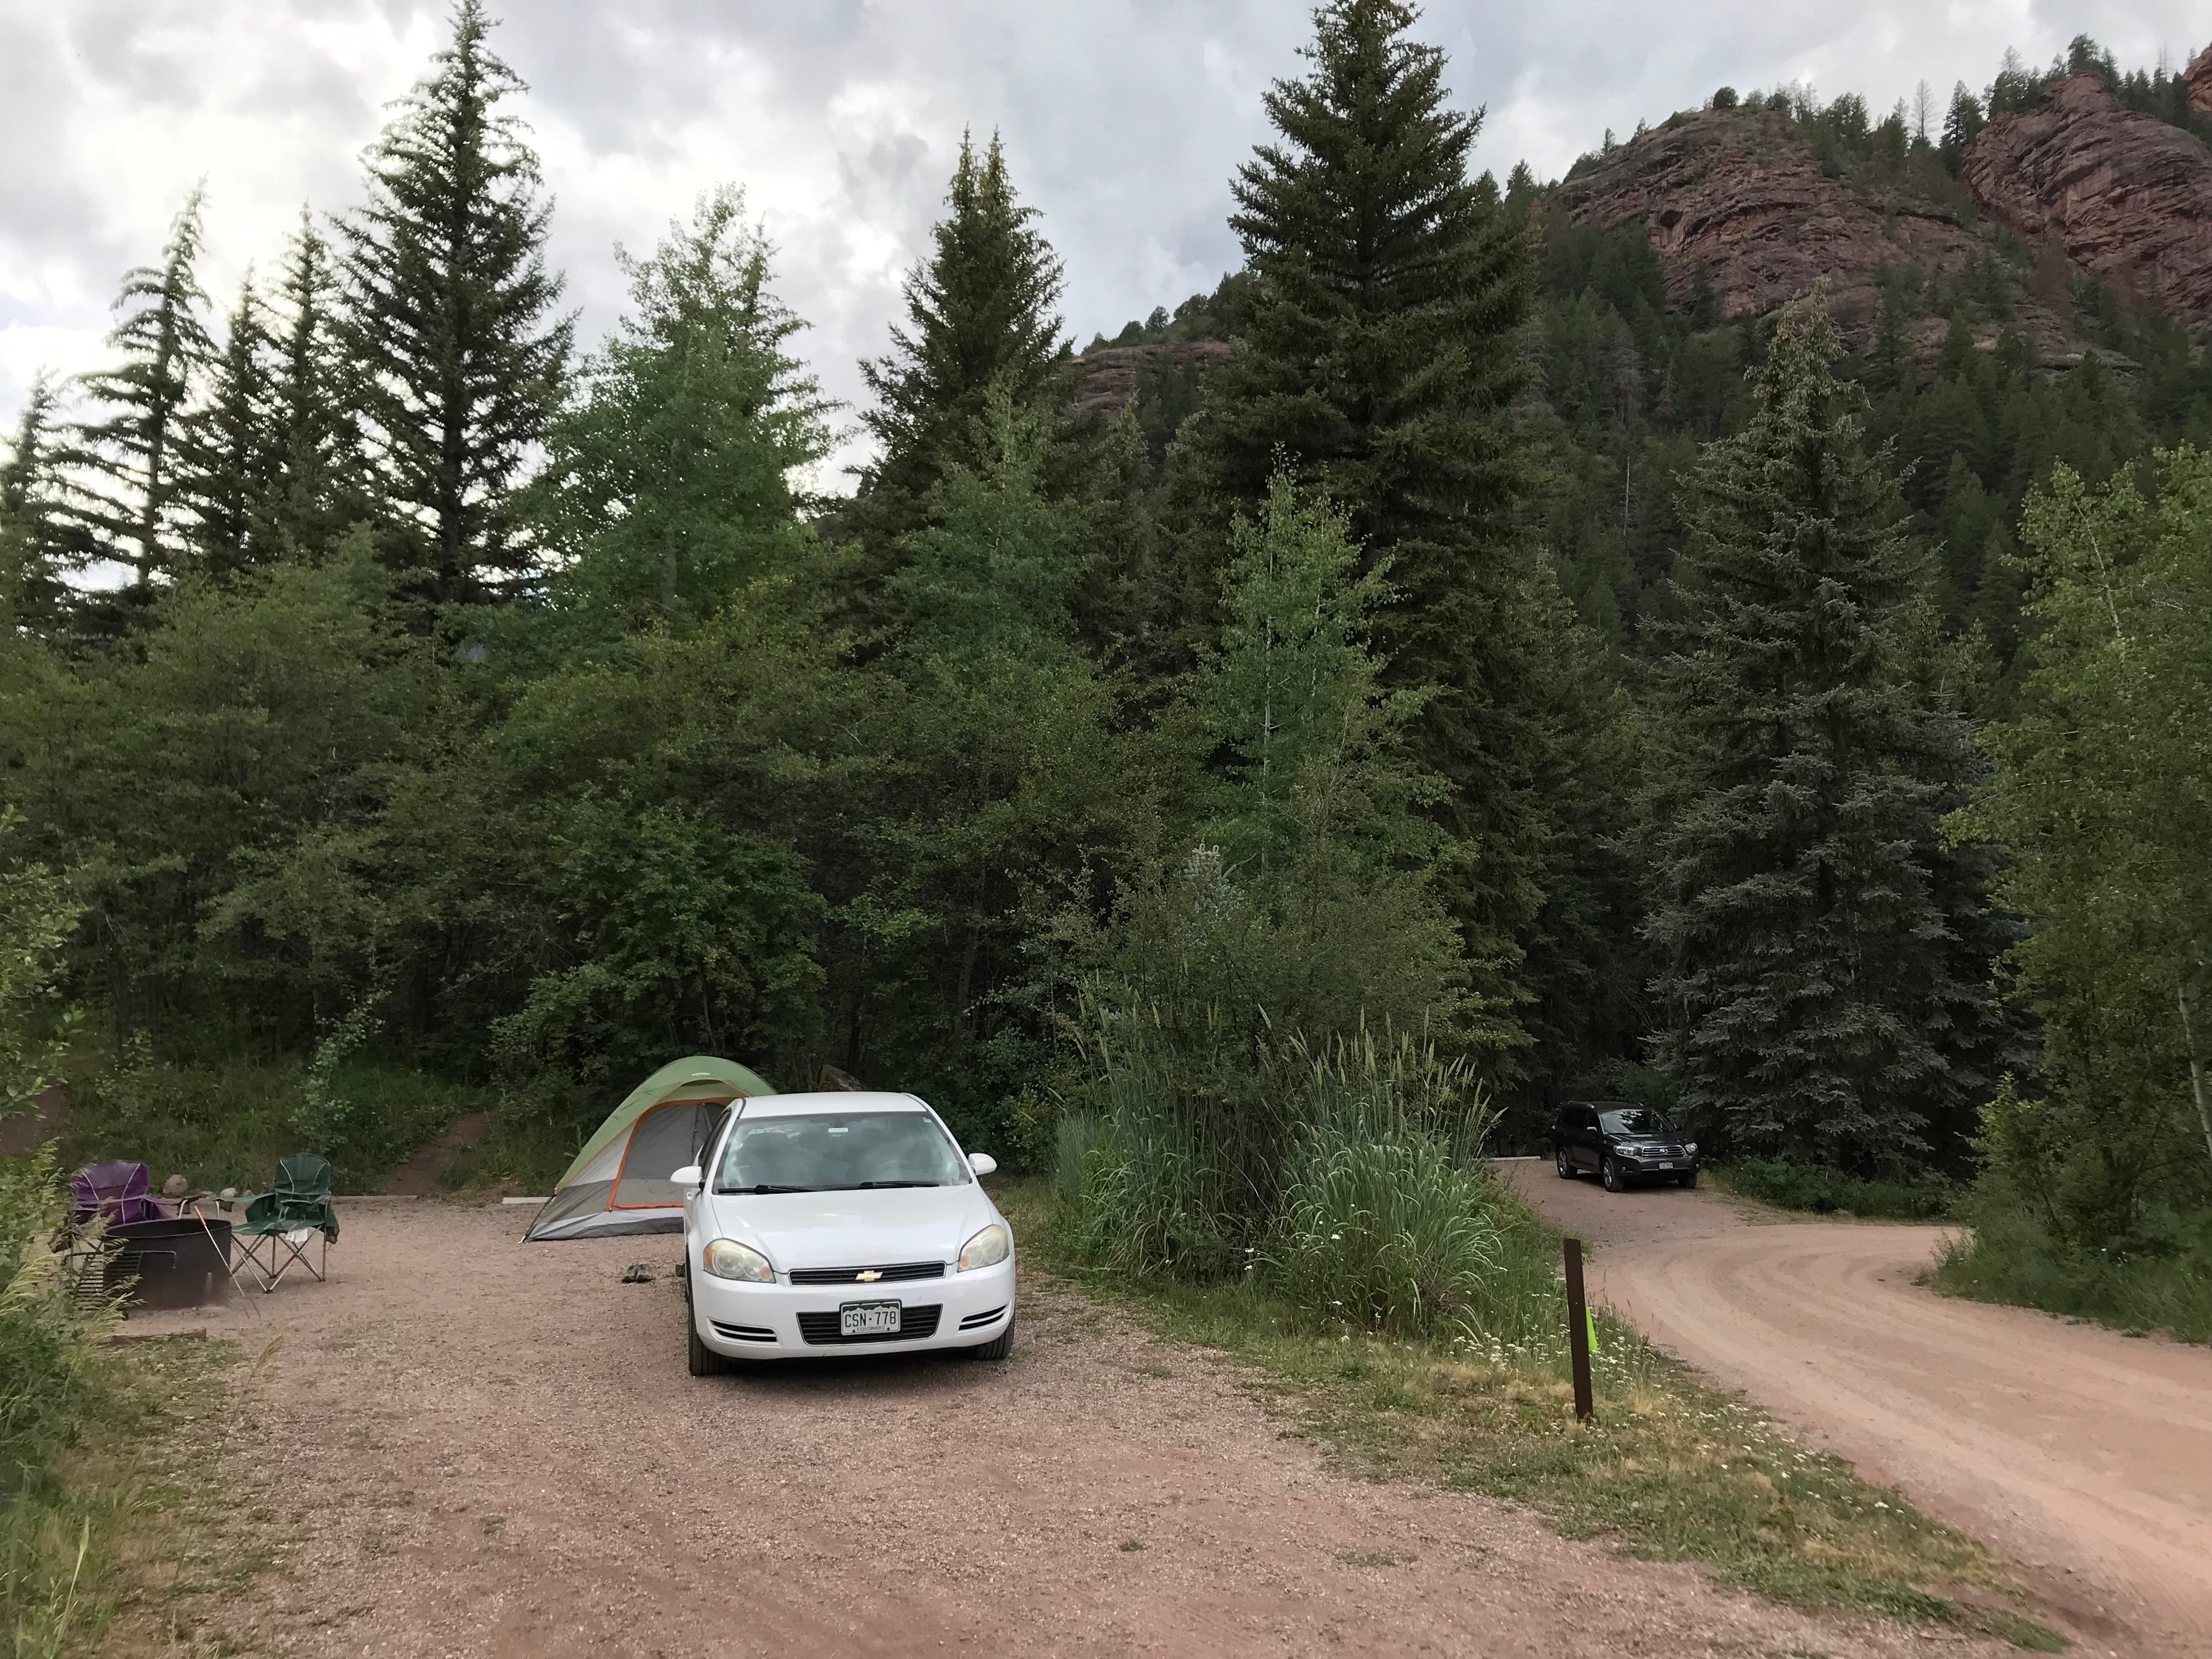 Camper submitted image from Redstone White River National Forest - 4